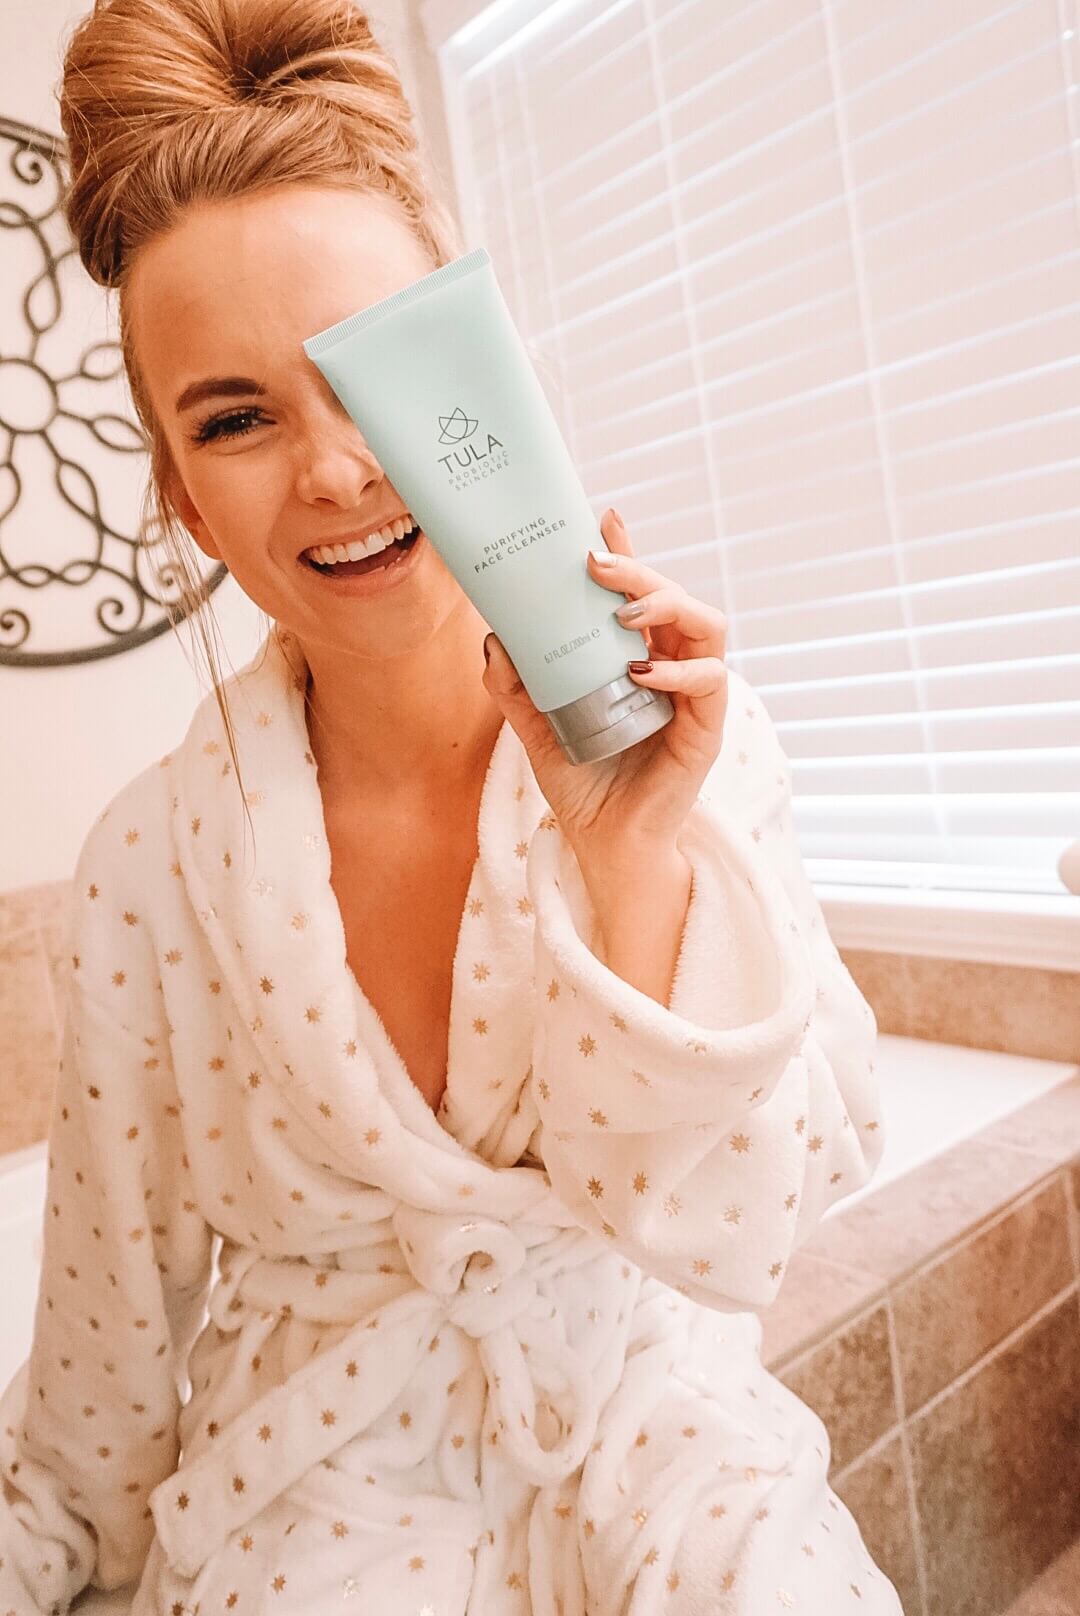 Tula skincare update after using Tula skincare for a month. Talking about my thoughts on Tula. The Blonder Life